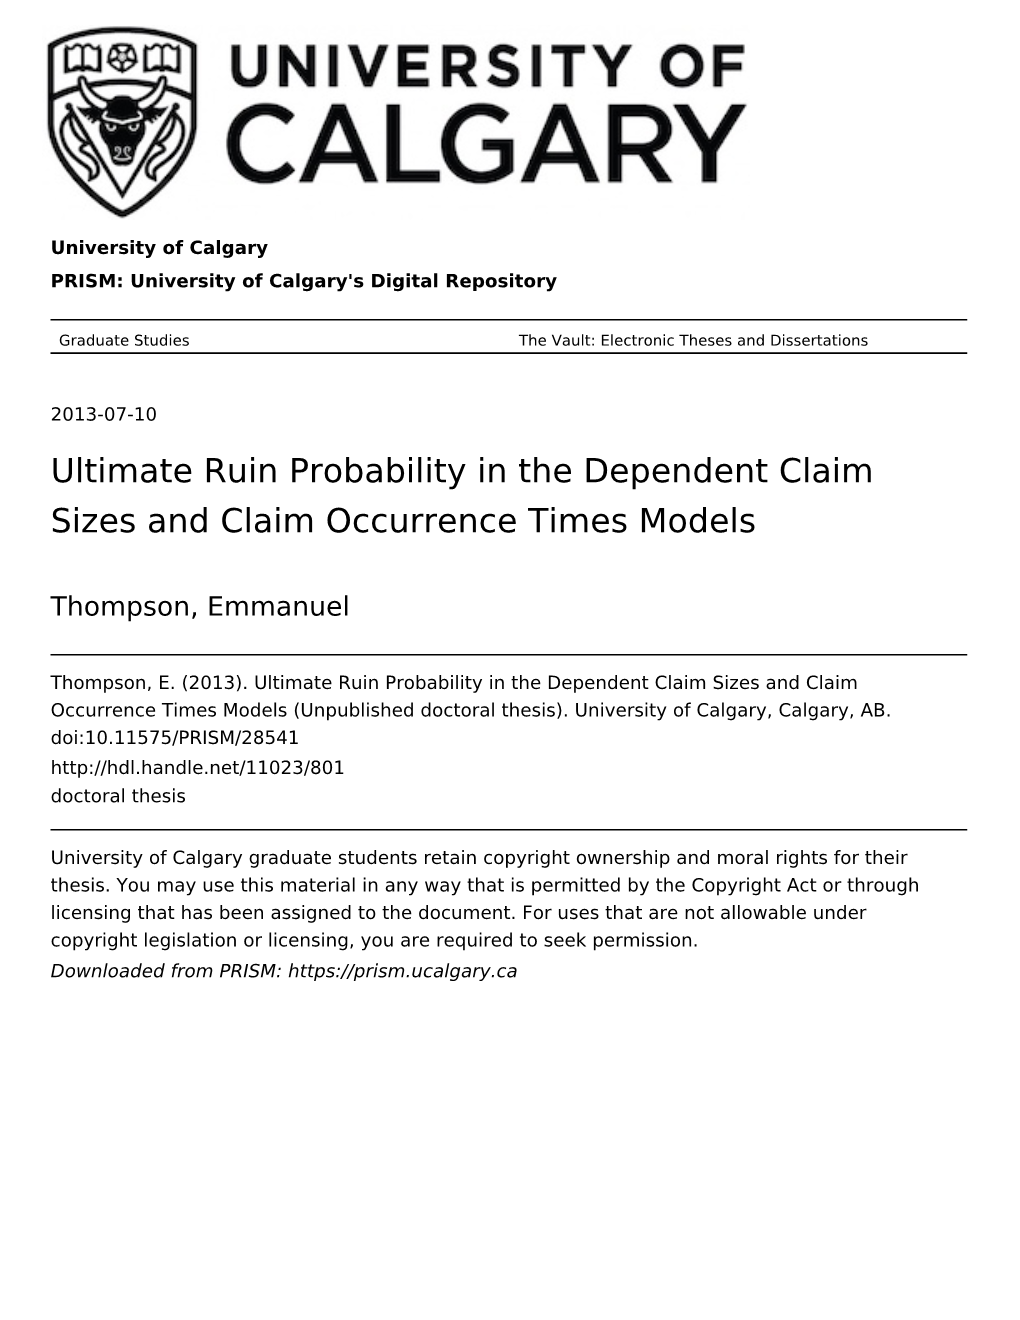 Ultimate Ruin Probability in the Dependent Claim Sizes and Claim Occurrence Times Models